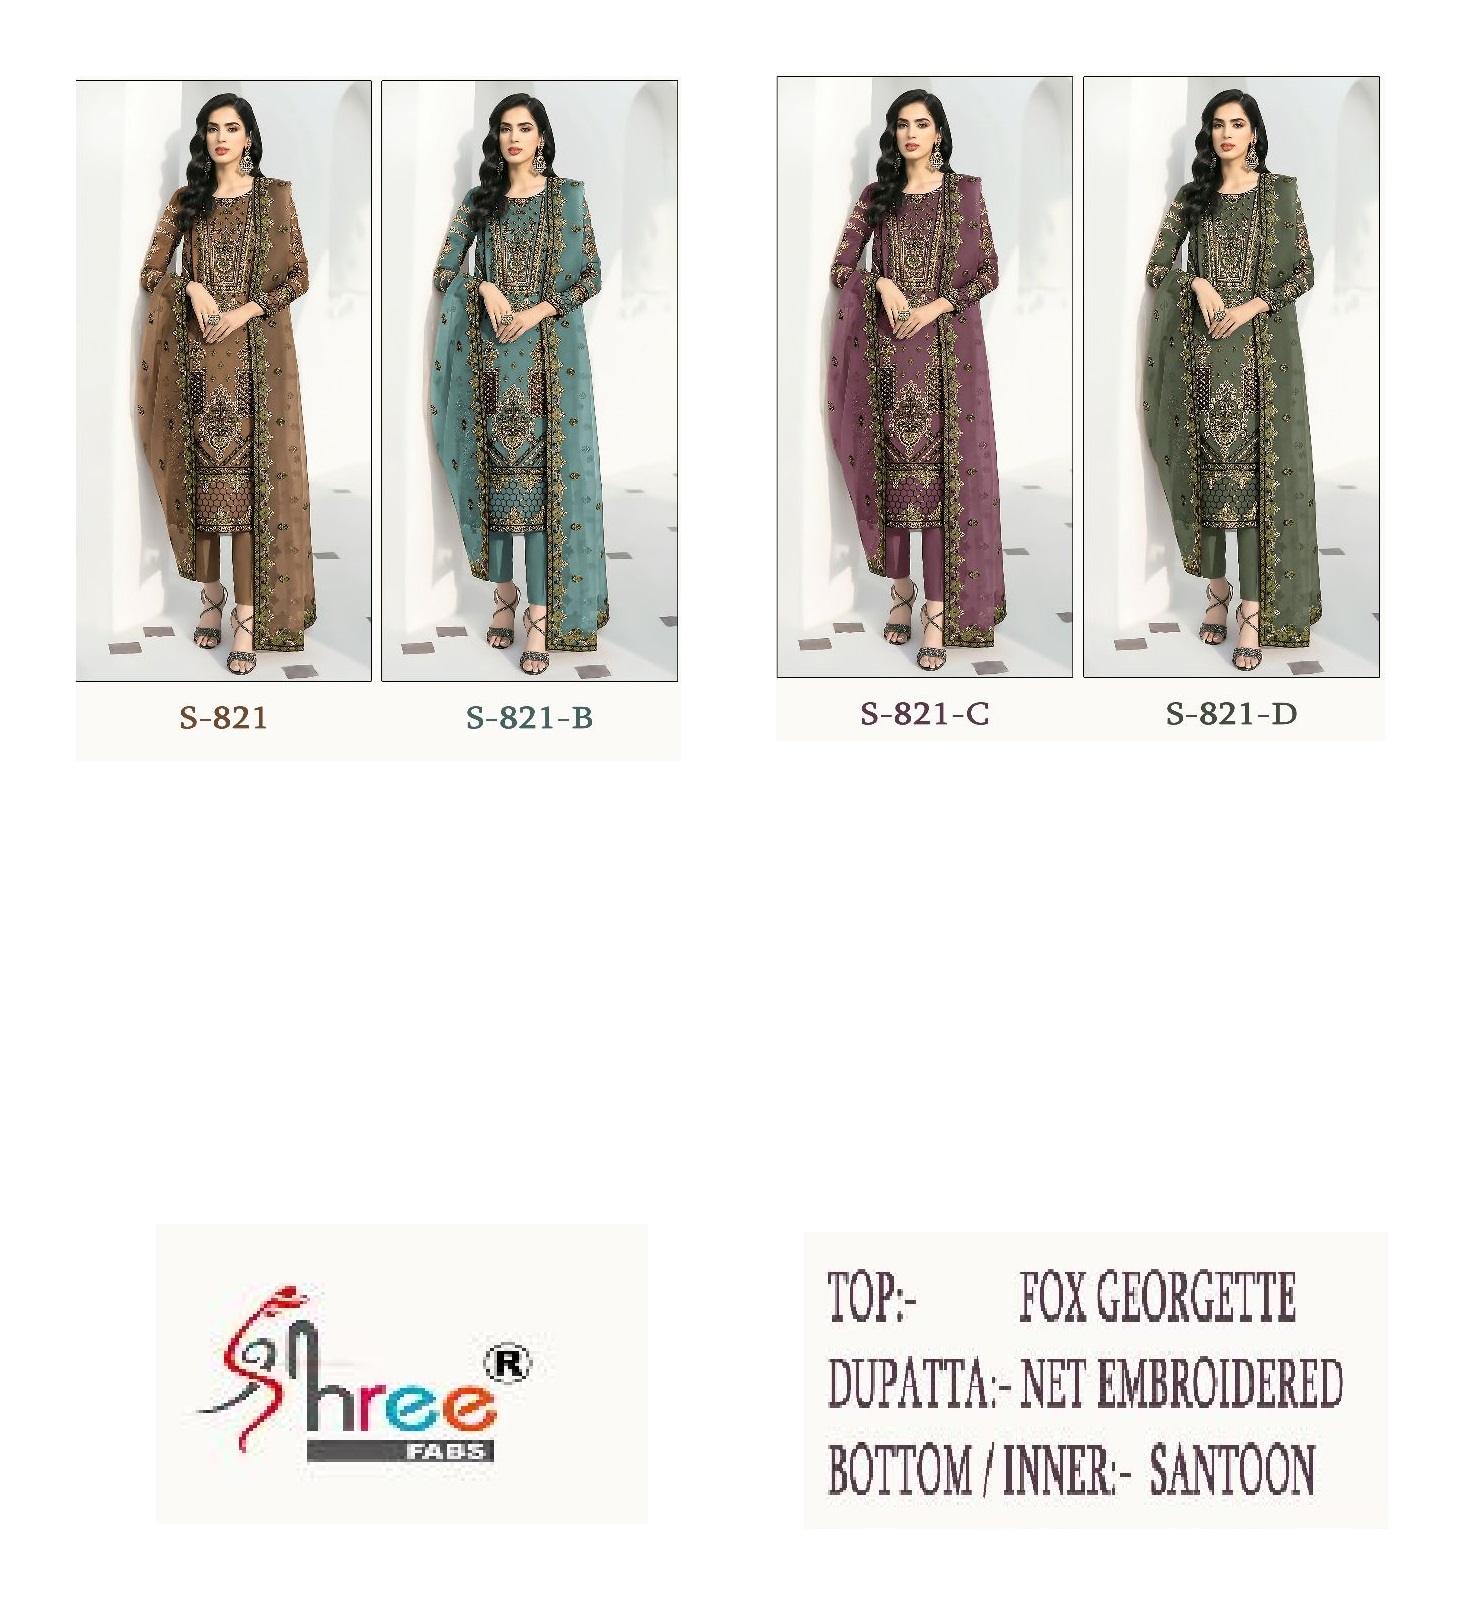 SHREE FABS S 821 PAKISTANI SUITS IN COLOURS